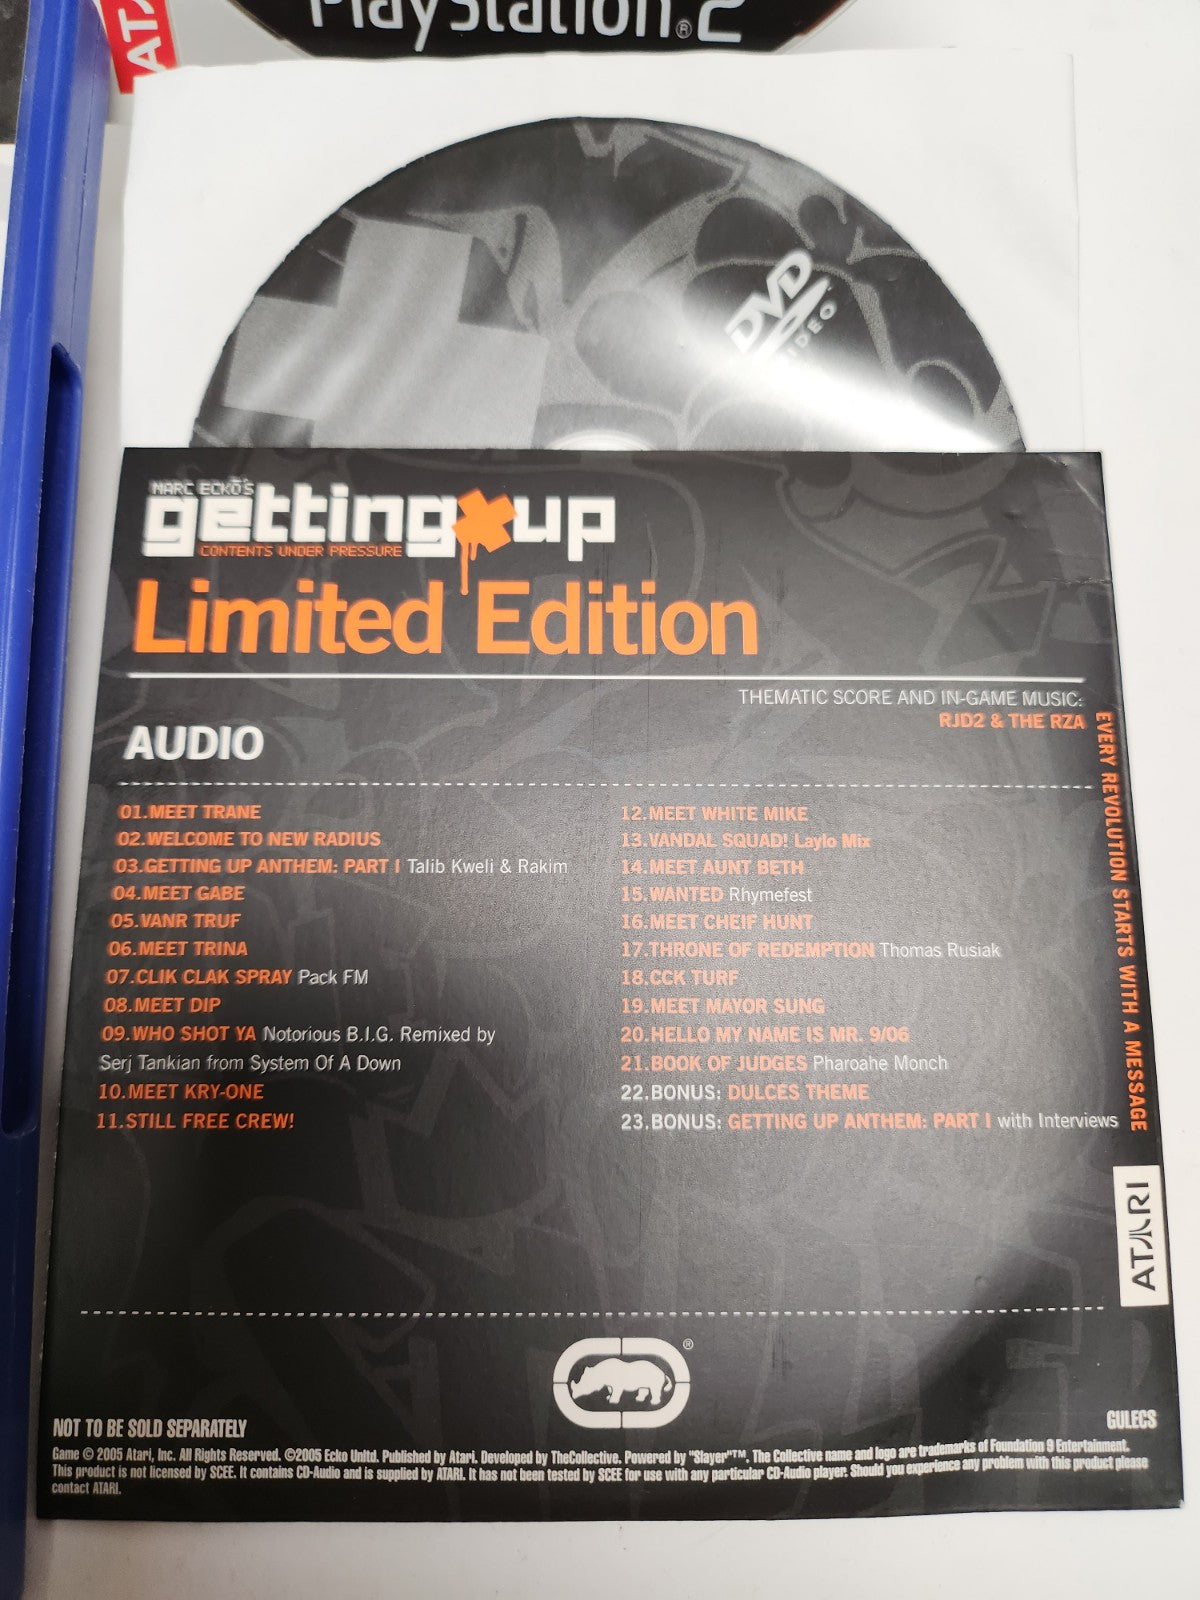 Marc Ecko's Getting Up Limited Editon Playstation 2